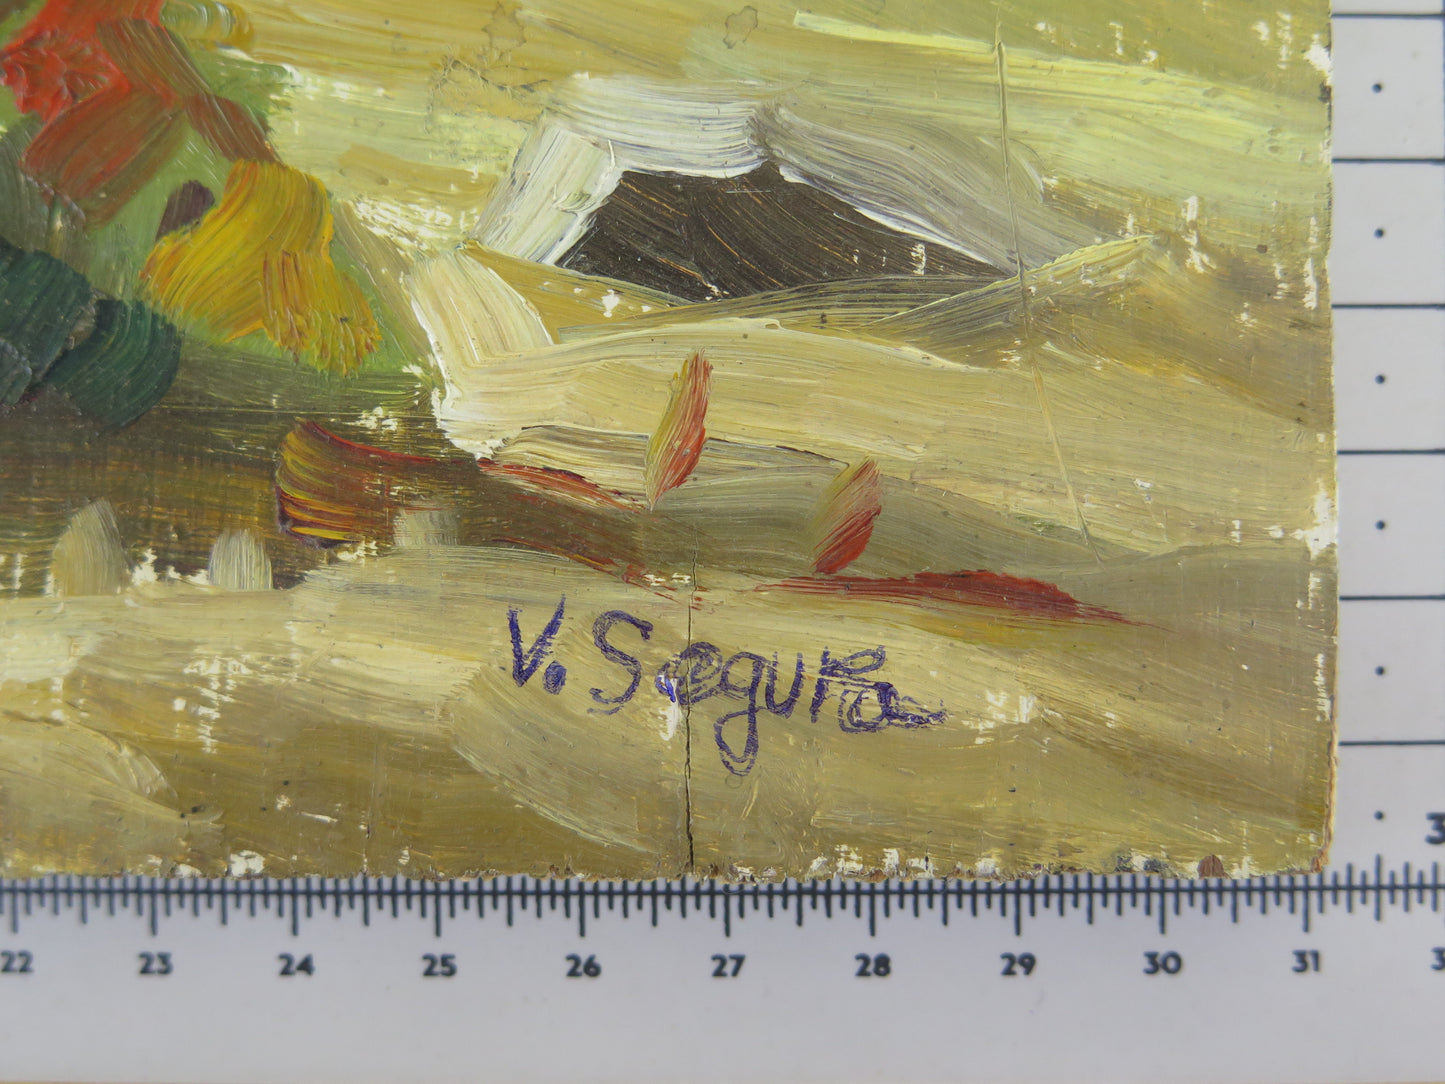 SMALL OIL PAINTING ON PANEL WORK BY SPANISH PAINTER VICENTE SEGURA MD12